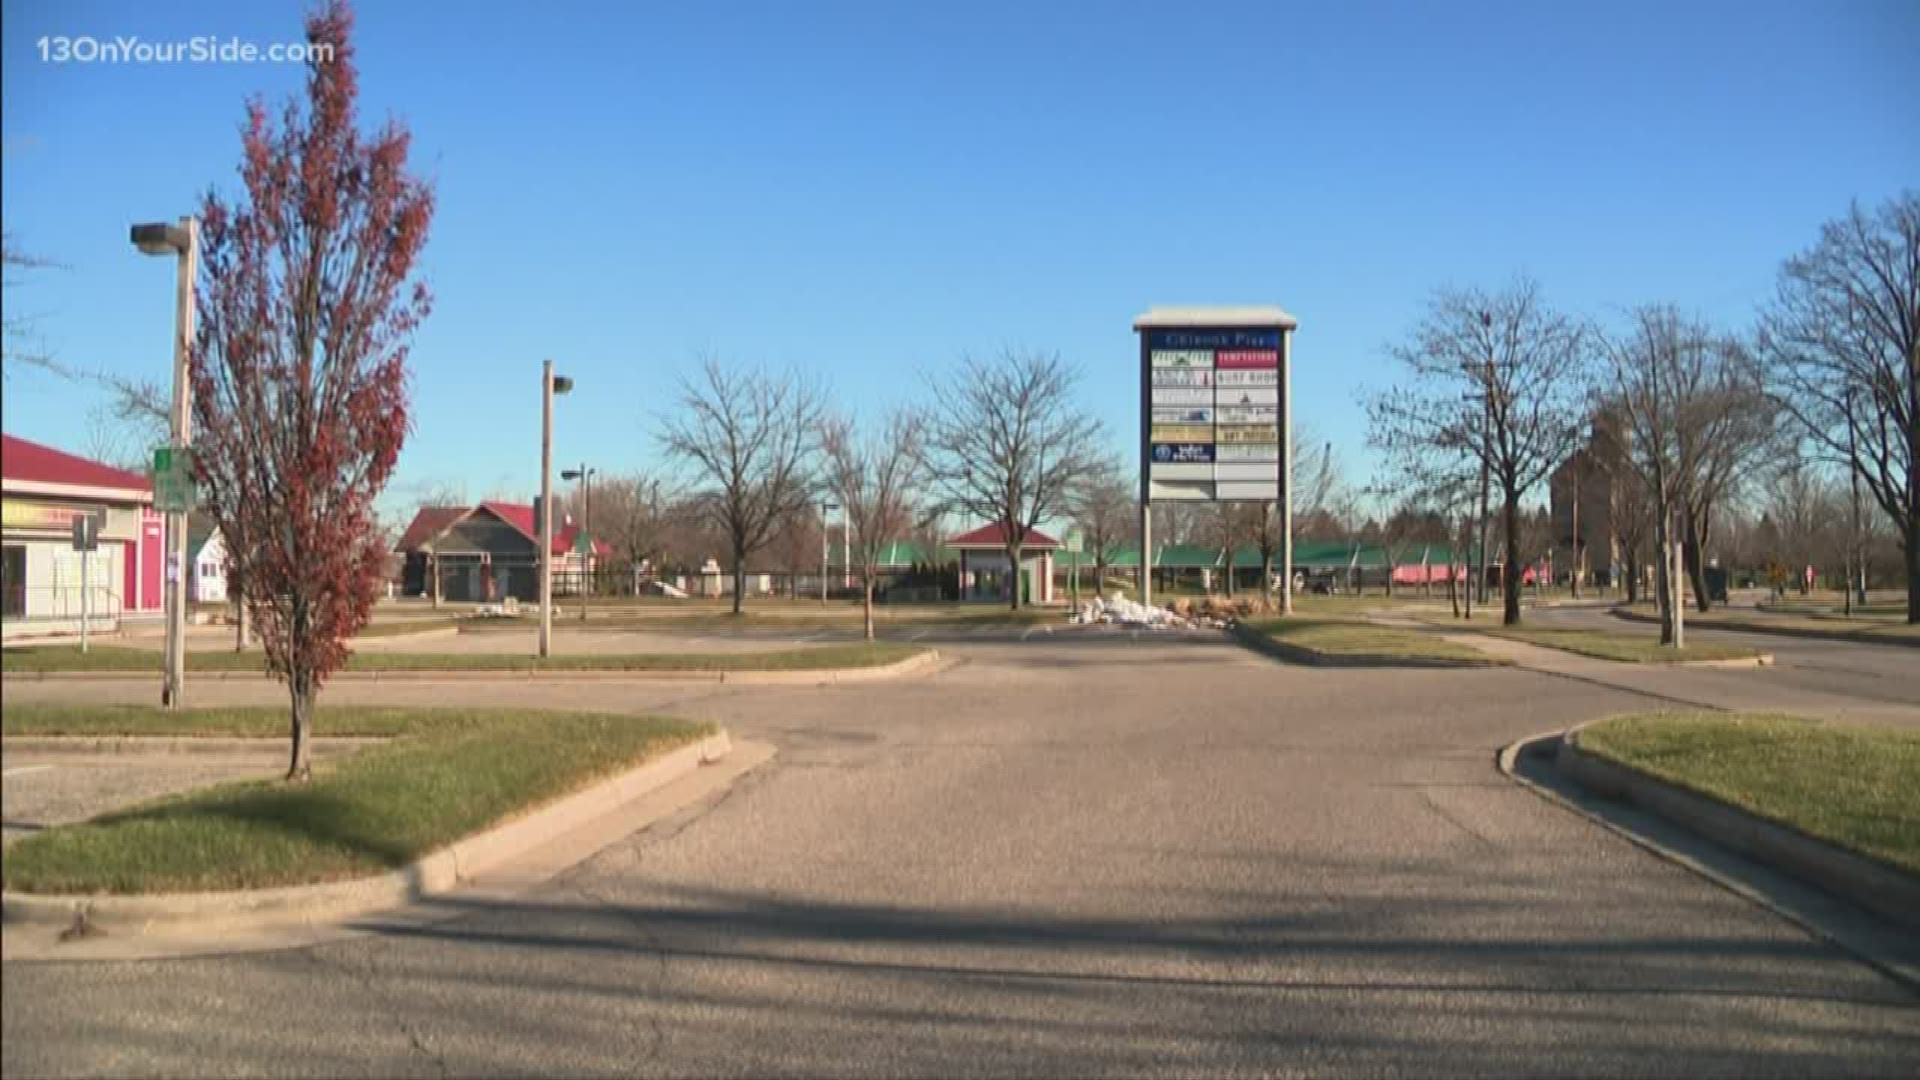 There's a mold problem at a major shopping center in Grand Haven. City leaders say high waters likely triggered the issue.